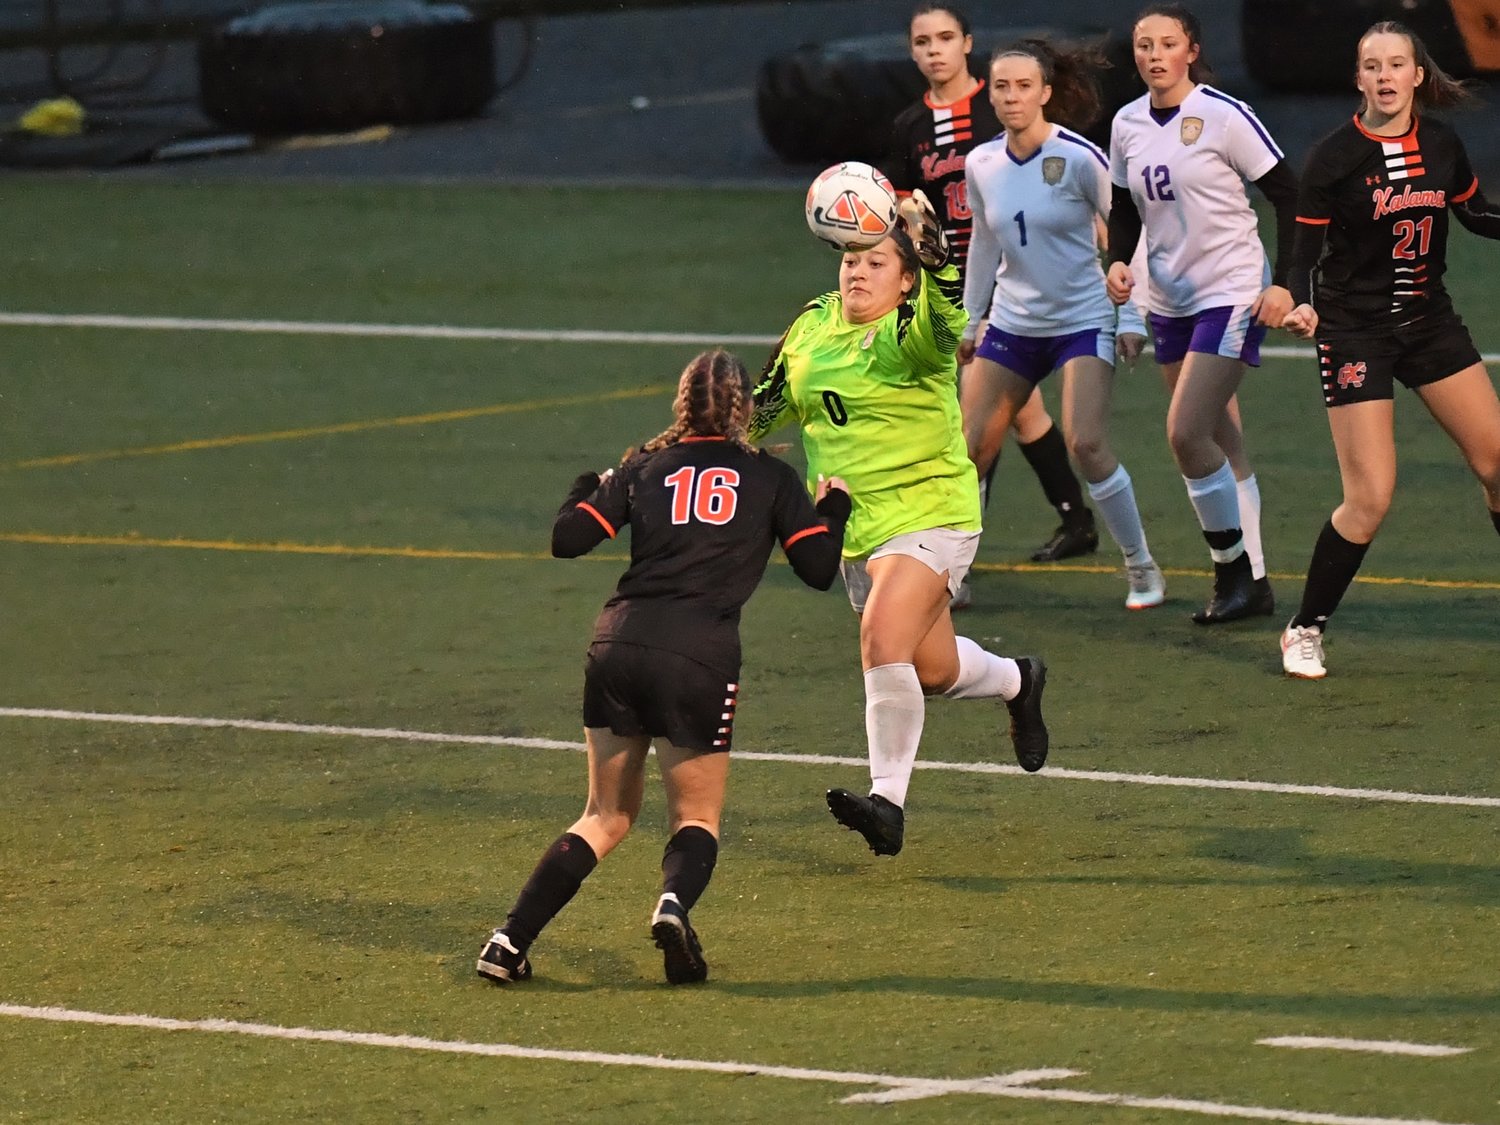 Onalaska keeper Alex Cleveland-Barrera gets to a ball before a Kalama forward in the Loggers 1-0 win Oct. 27. Cleveland-Barrera finished with 12 saves in the winning effort.